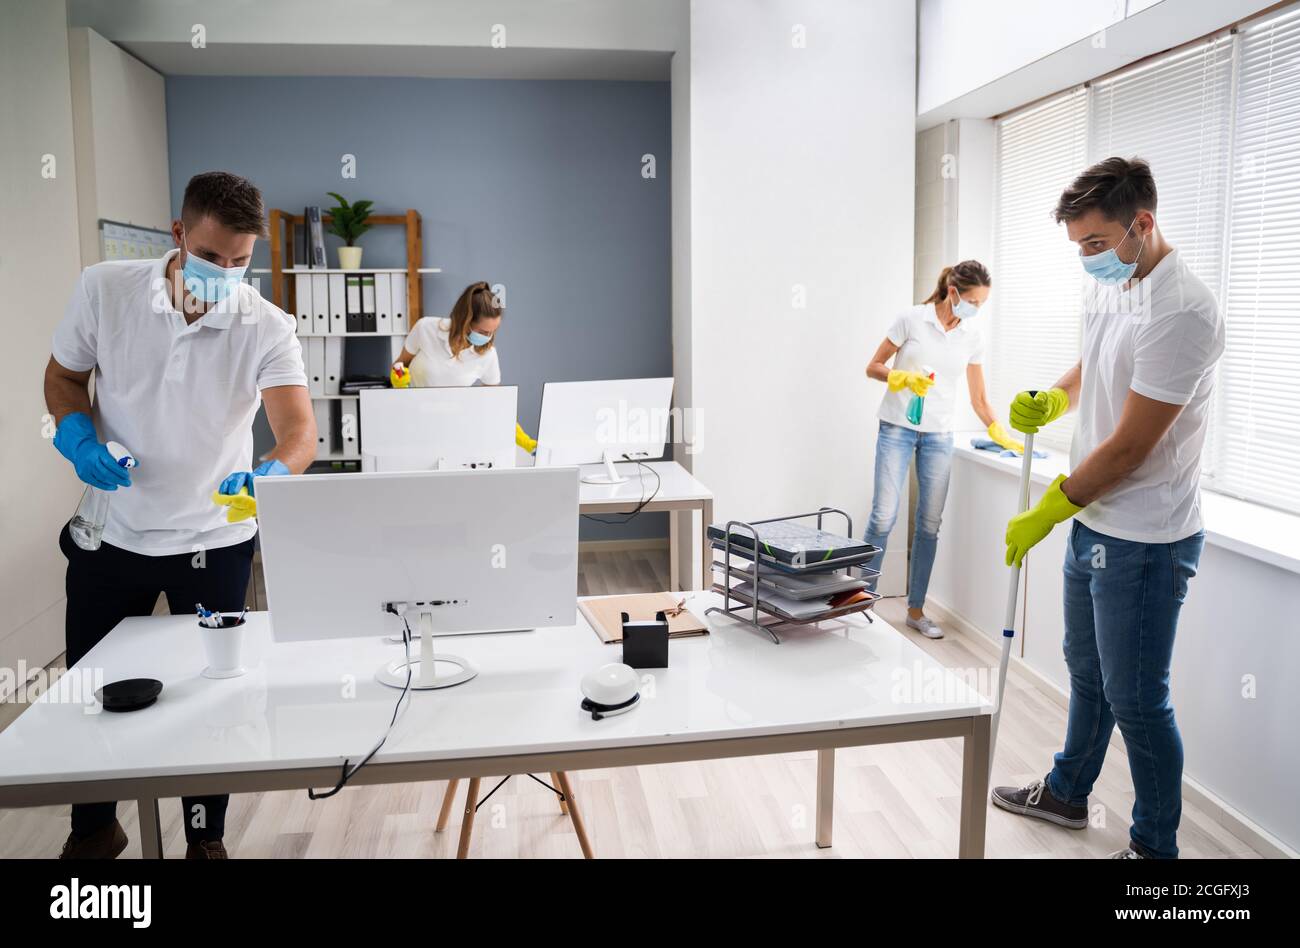 Professional Office Cleaning Services With Face Masks Stock Photo - Alamy